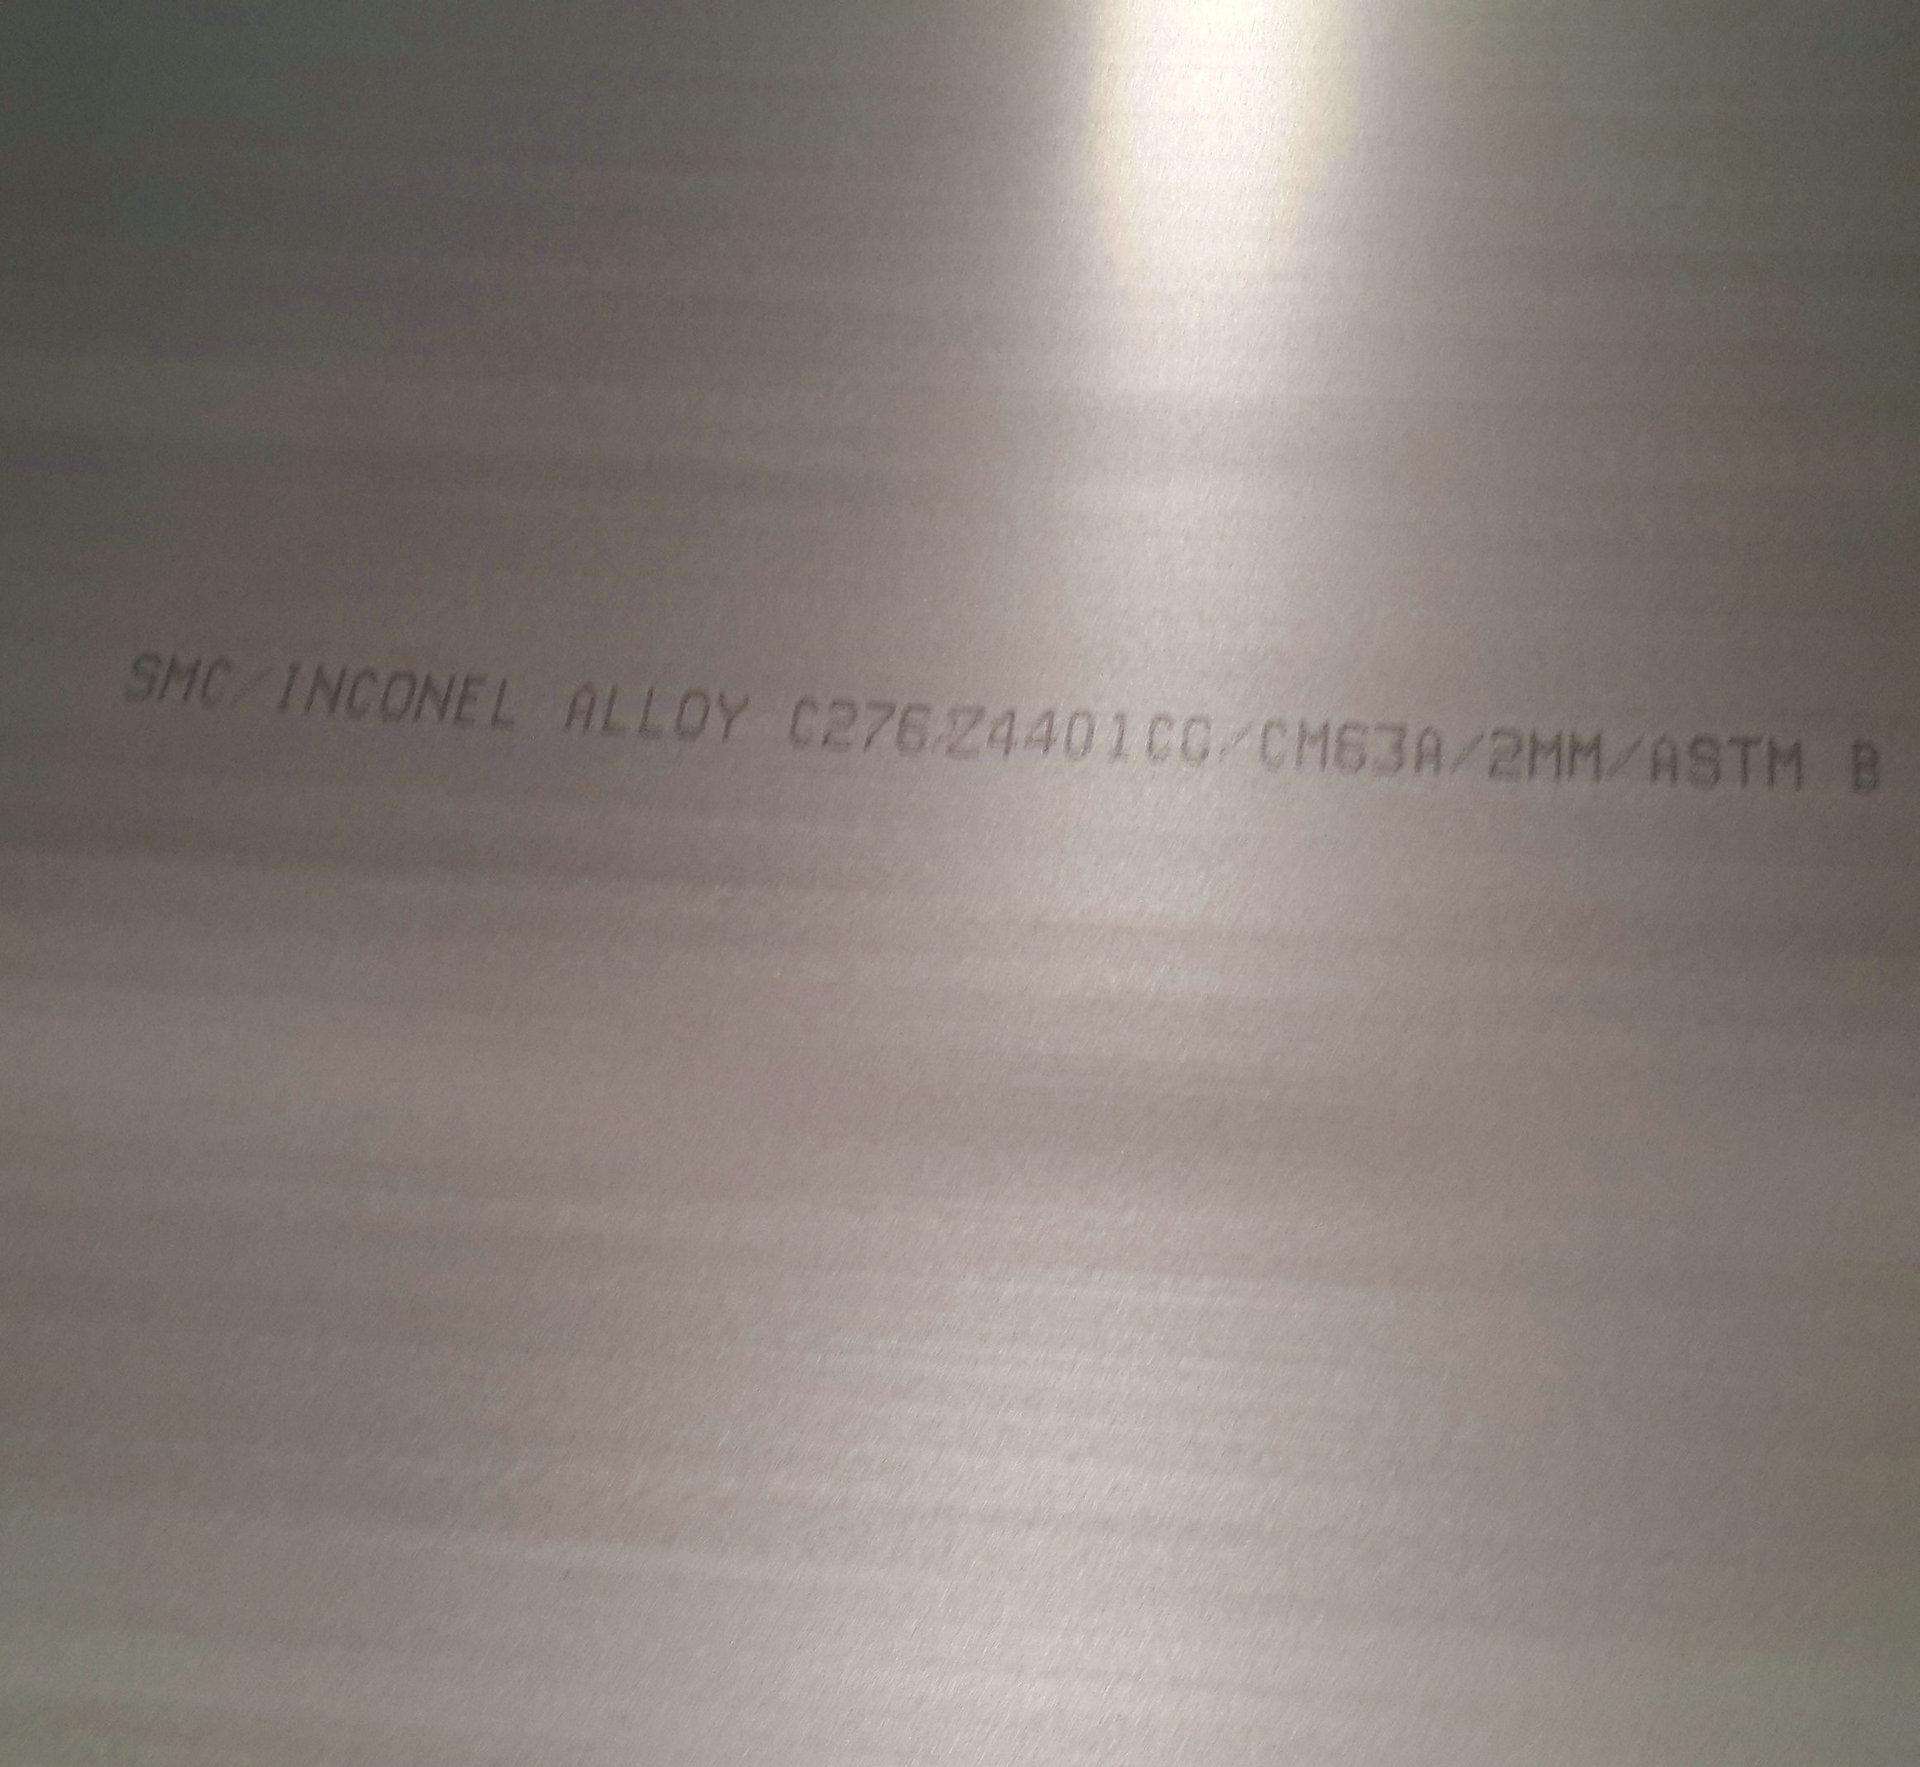 High Quality 316 Stainless Steel Tubing - Nickel Alloy Plate/sheet inconel 600 601 625 X-750 718 825 – Join